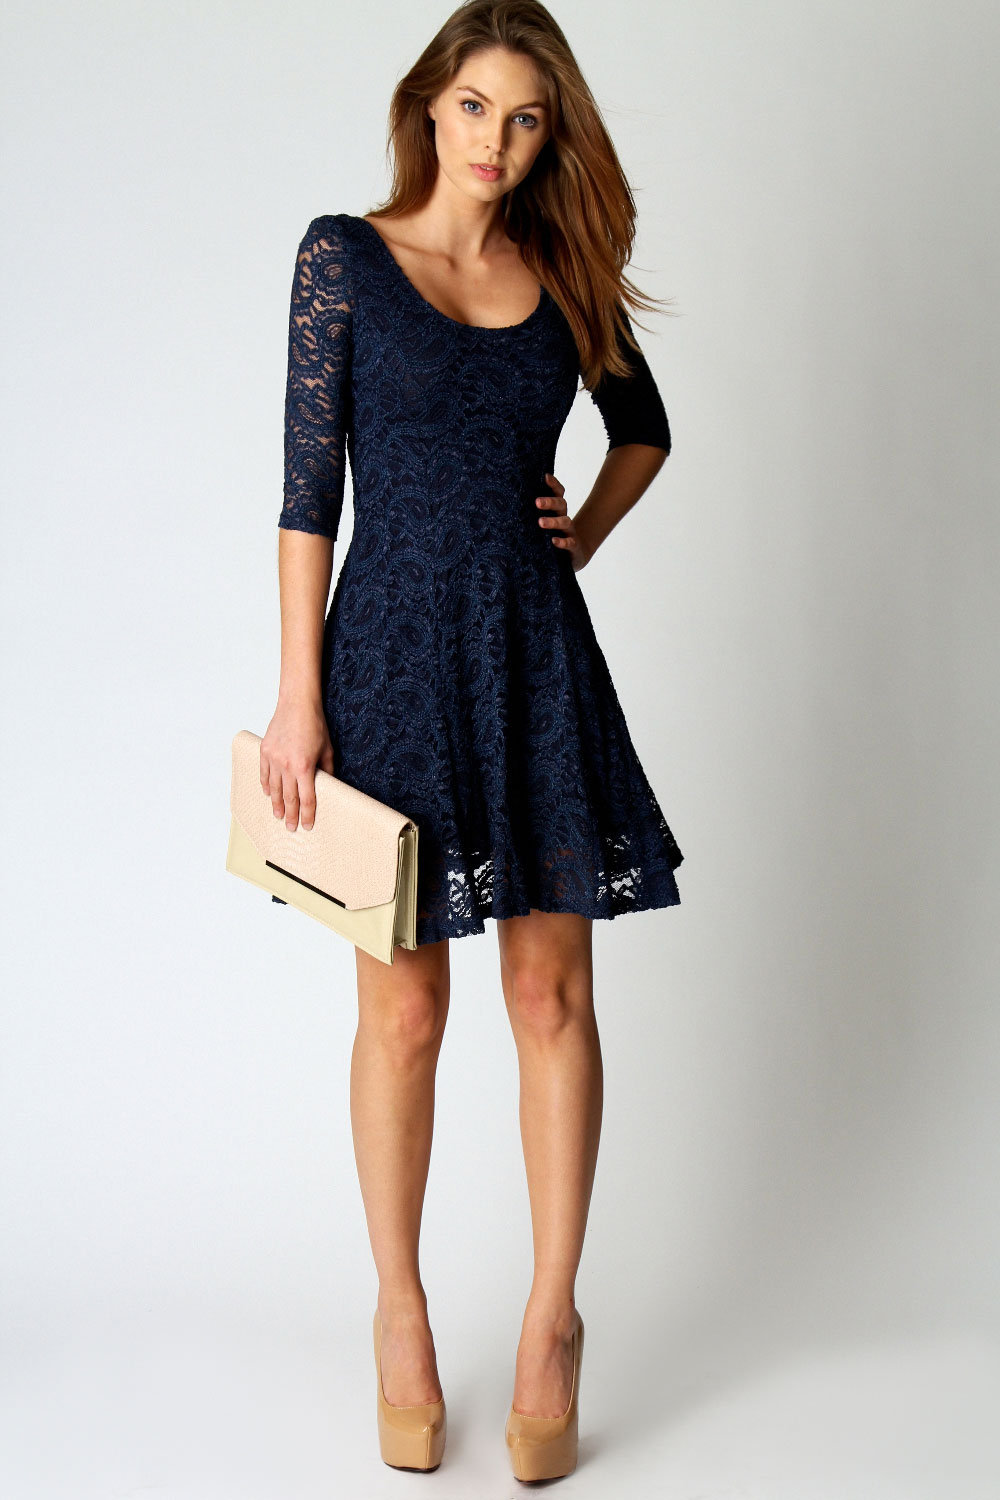 Lace Fit and Flare Dress Picture Collection | DressedUpGirl.com